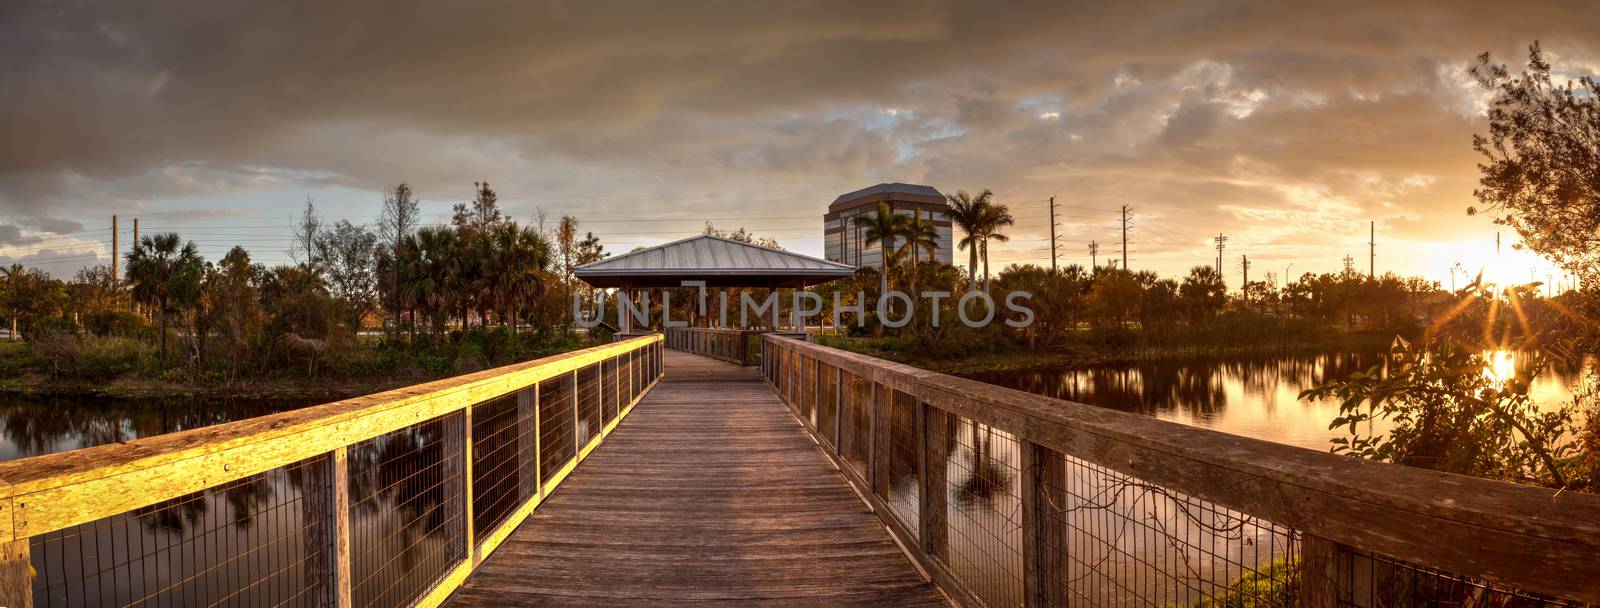 Sunset over Gazebo on a wooden secluded, tranquil boardwalk along a marsh pond in Freedom Park in Naples, Florida